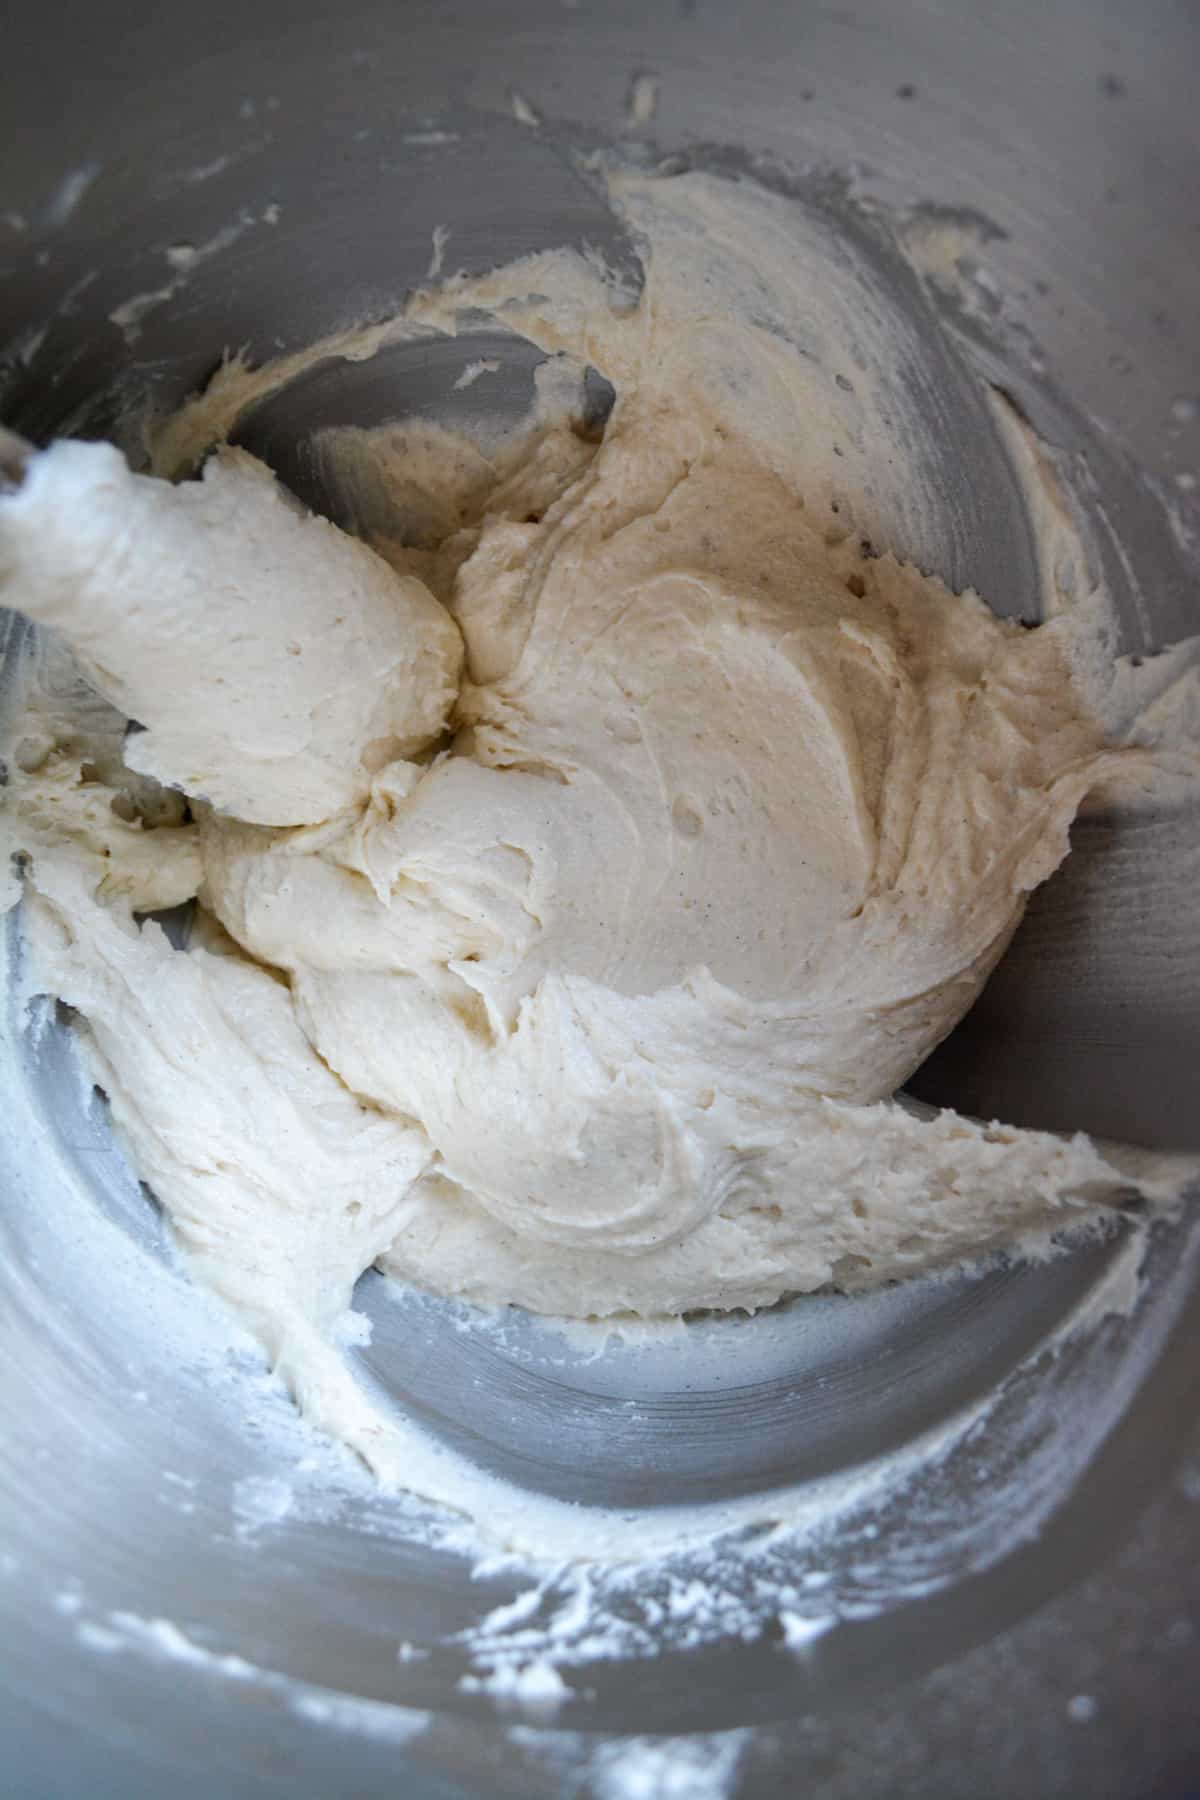 Finished batter in the bowl of a mixer.